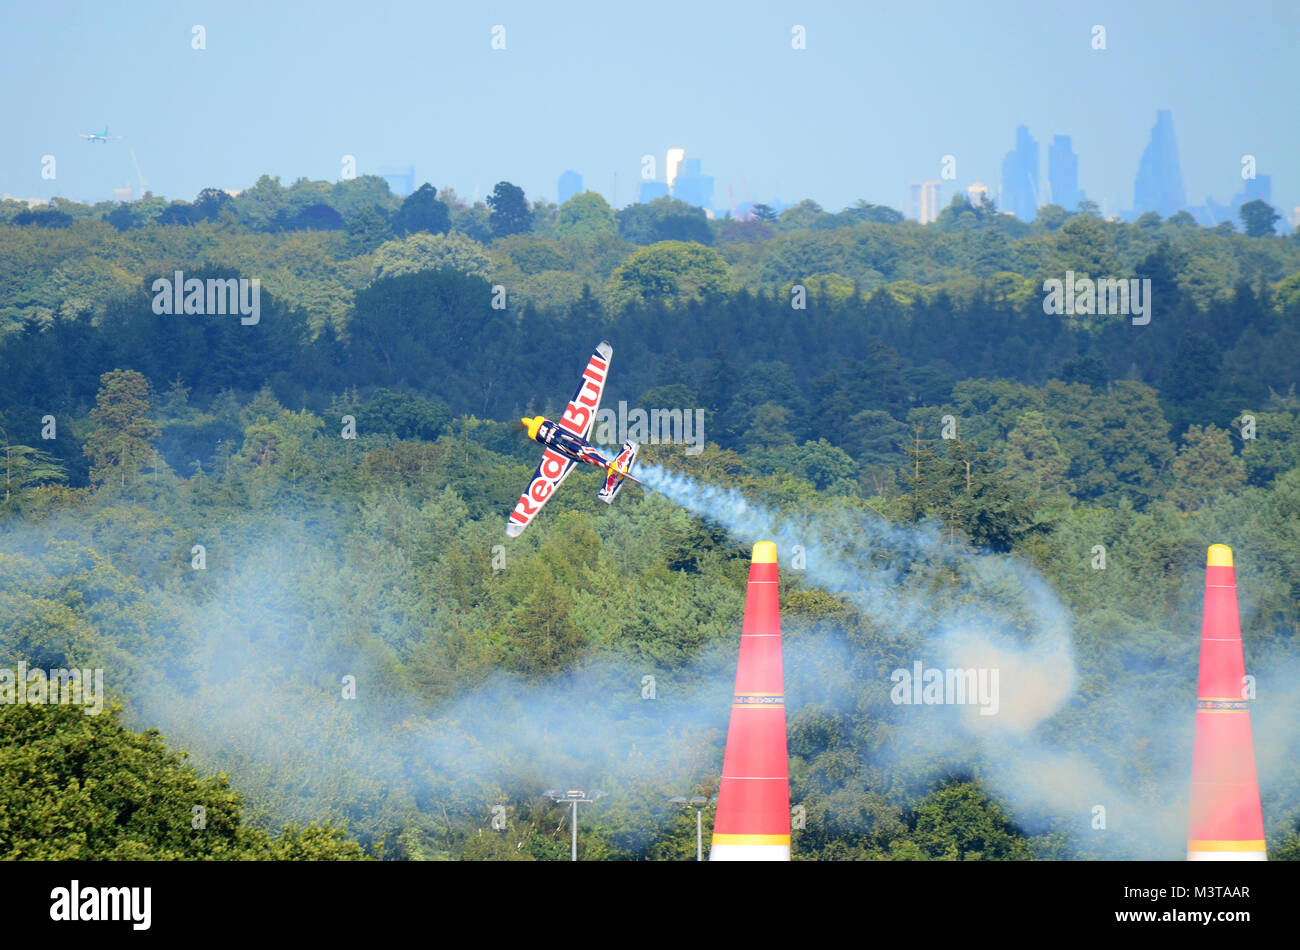 Pilot competing in the Red Bull Air Race Royal Ascot Racecourse race course flying over the Royal Berkshire countryside with London city skyline Stock Photo